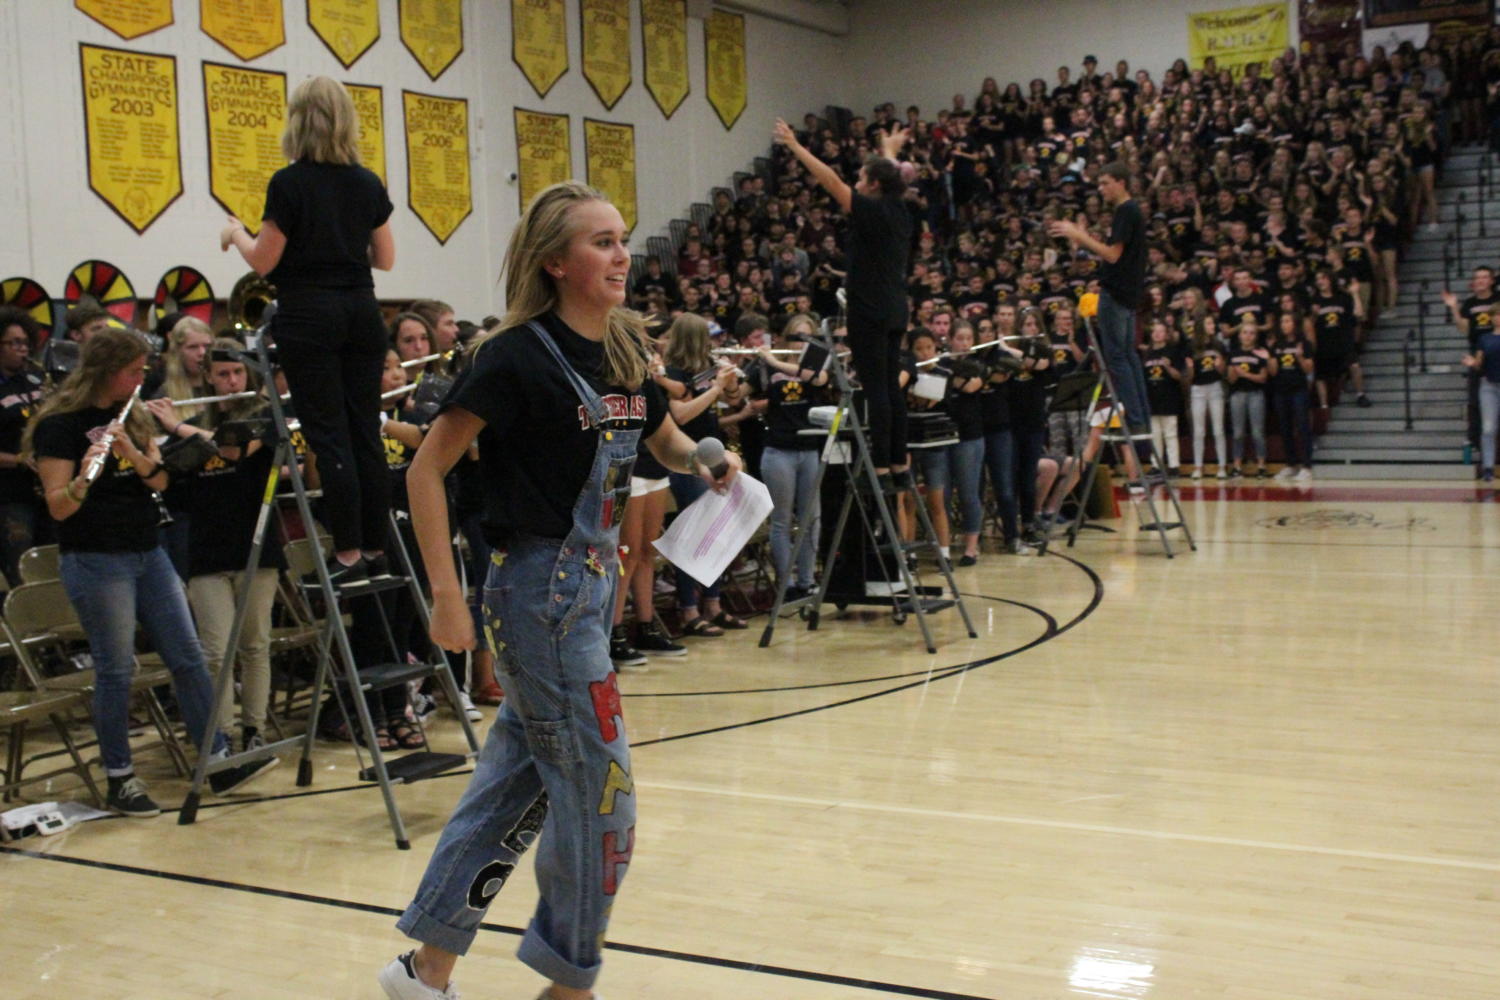 Rylee Bundy the MC at the assembly